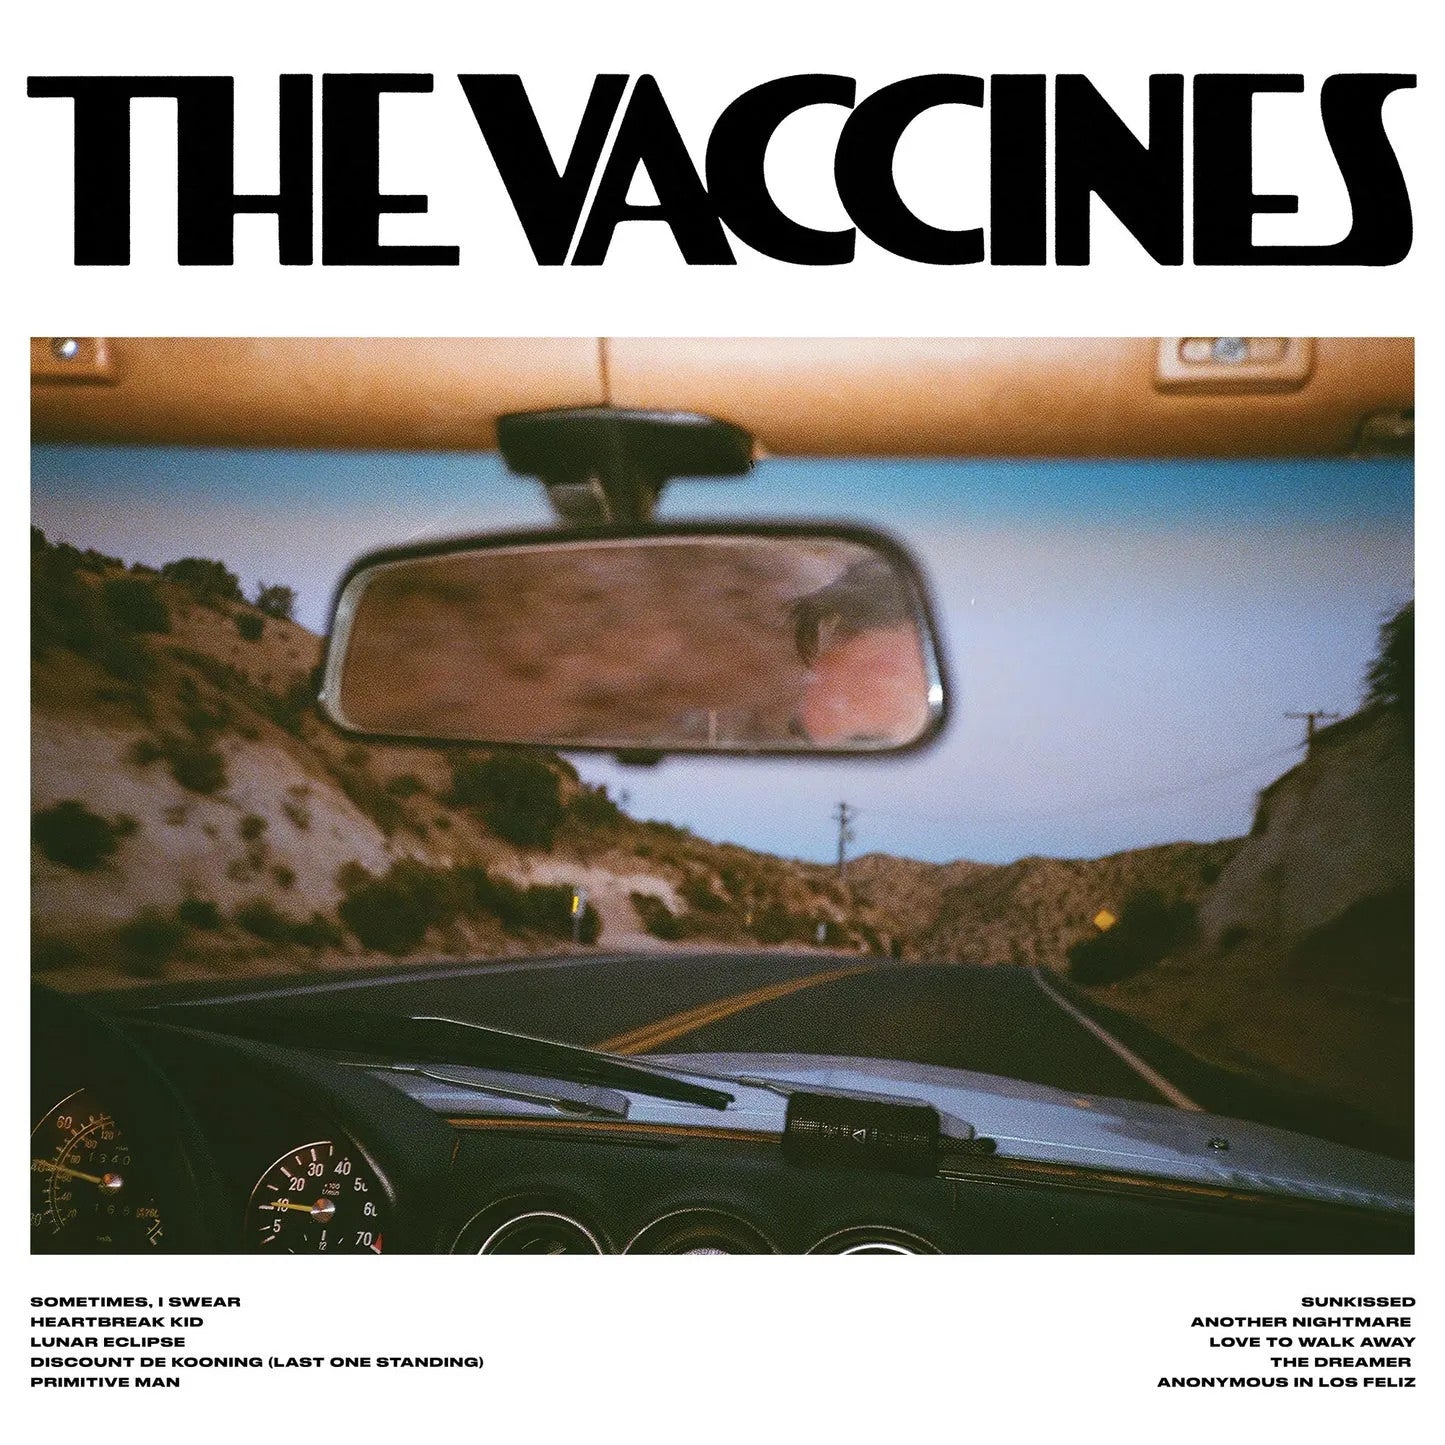 THE VACCINES - Pick-Up Full Of Pink Carnations - Cassette [JUL 19]